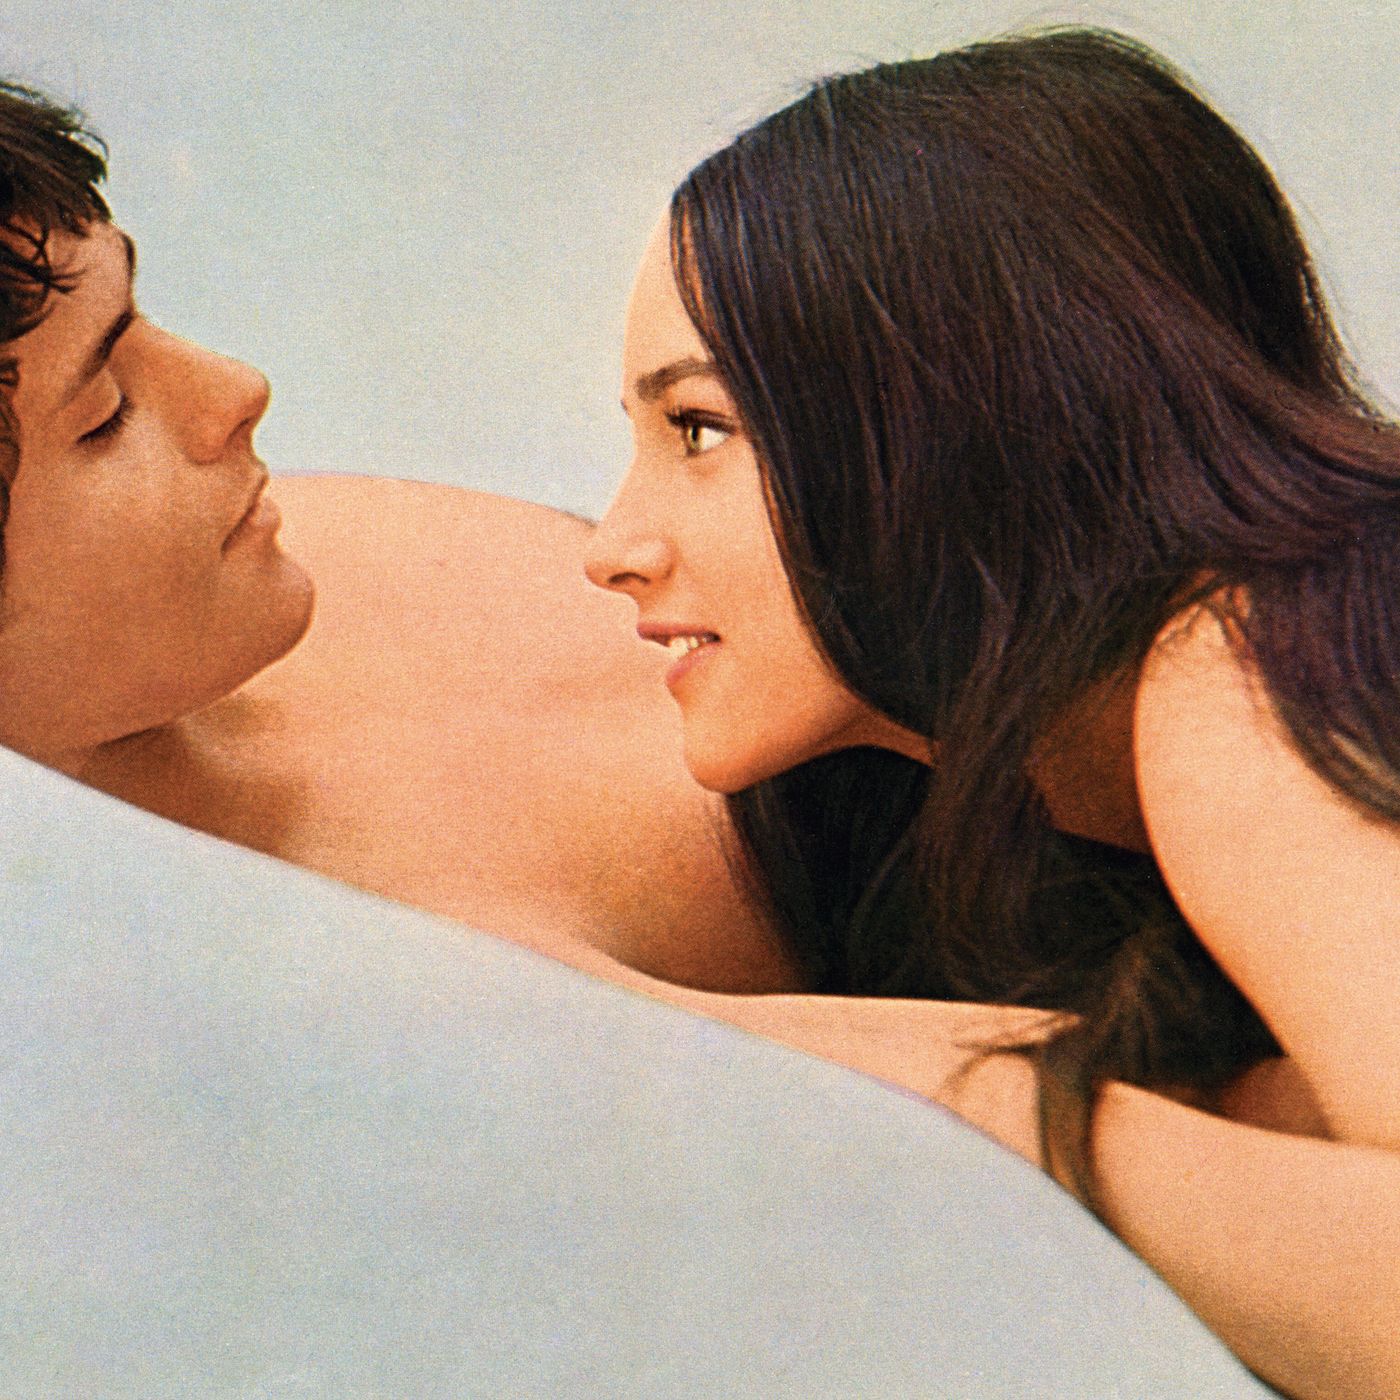 Naughty America Videos Father Daughter Rape - Olivia Hussey and Leonard Whiting's Romeo and Juliet Lawsuit